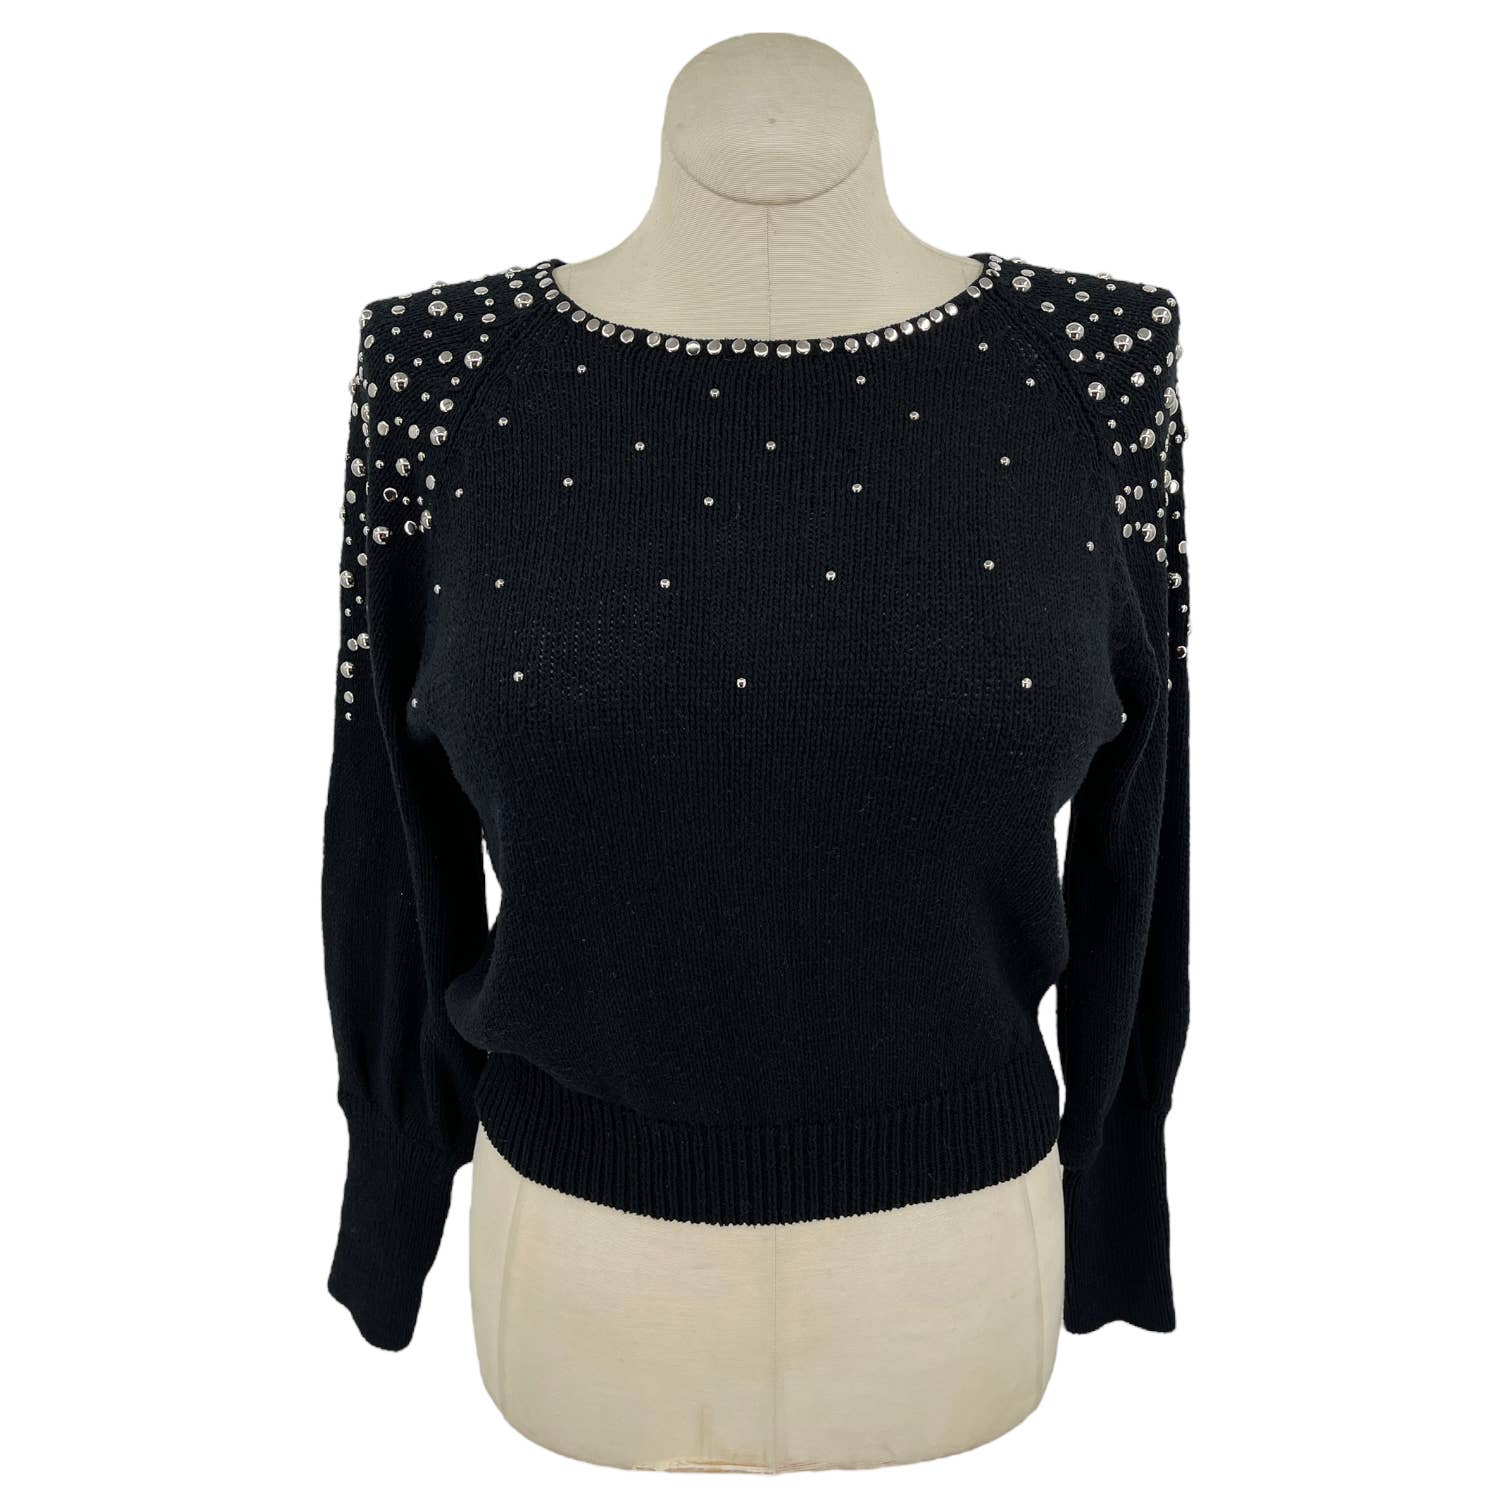 Vintage 90s Black Silk Blend Sweater with Silver Studs Bonnie and